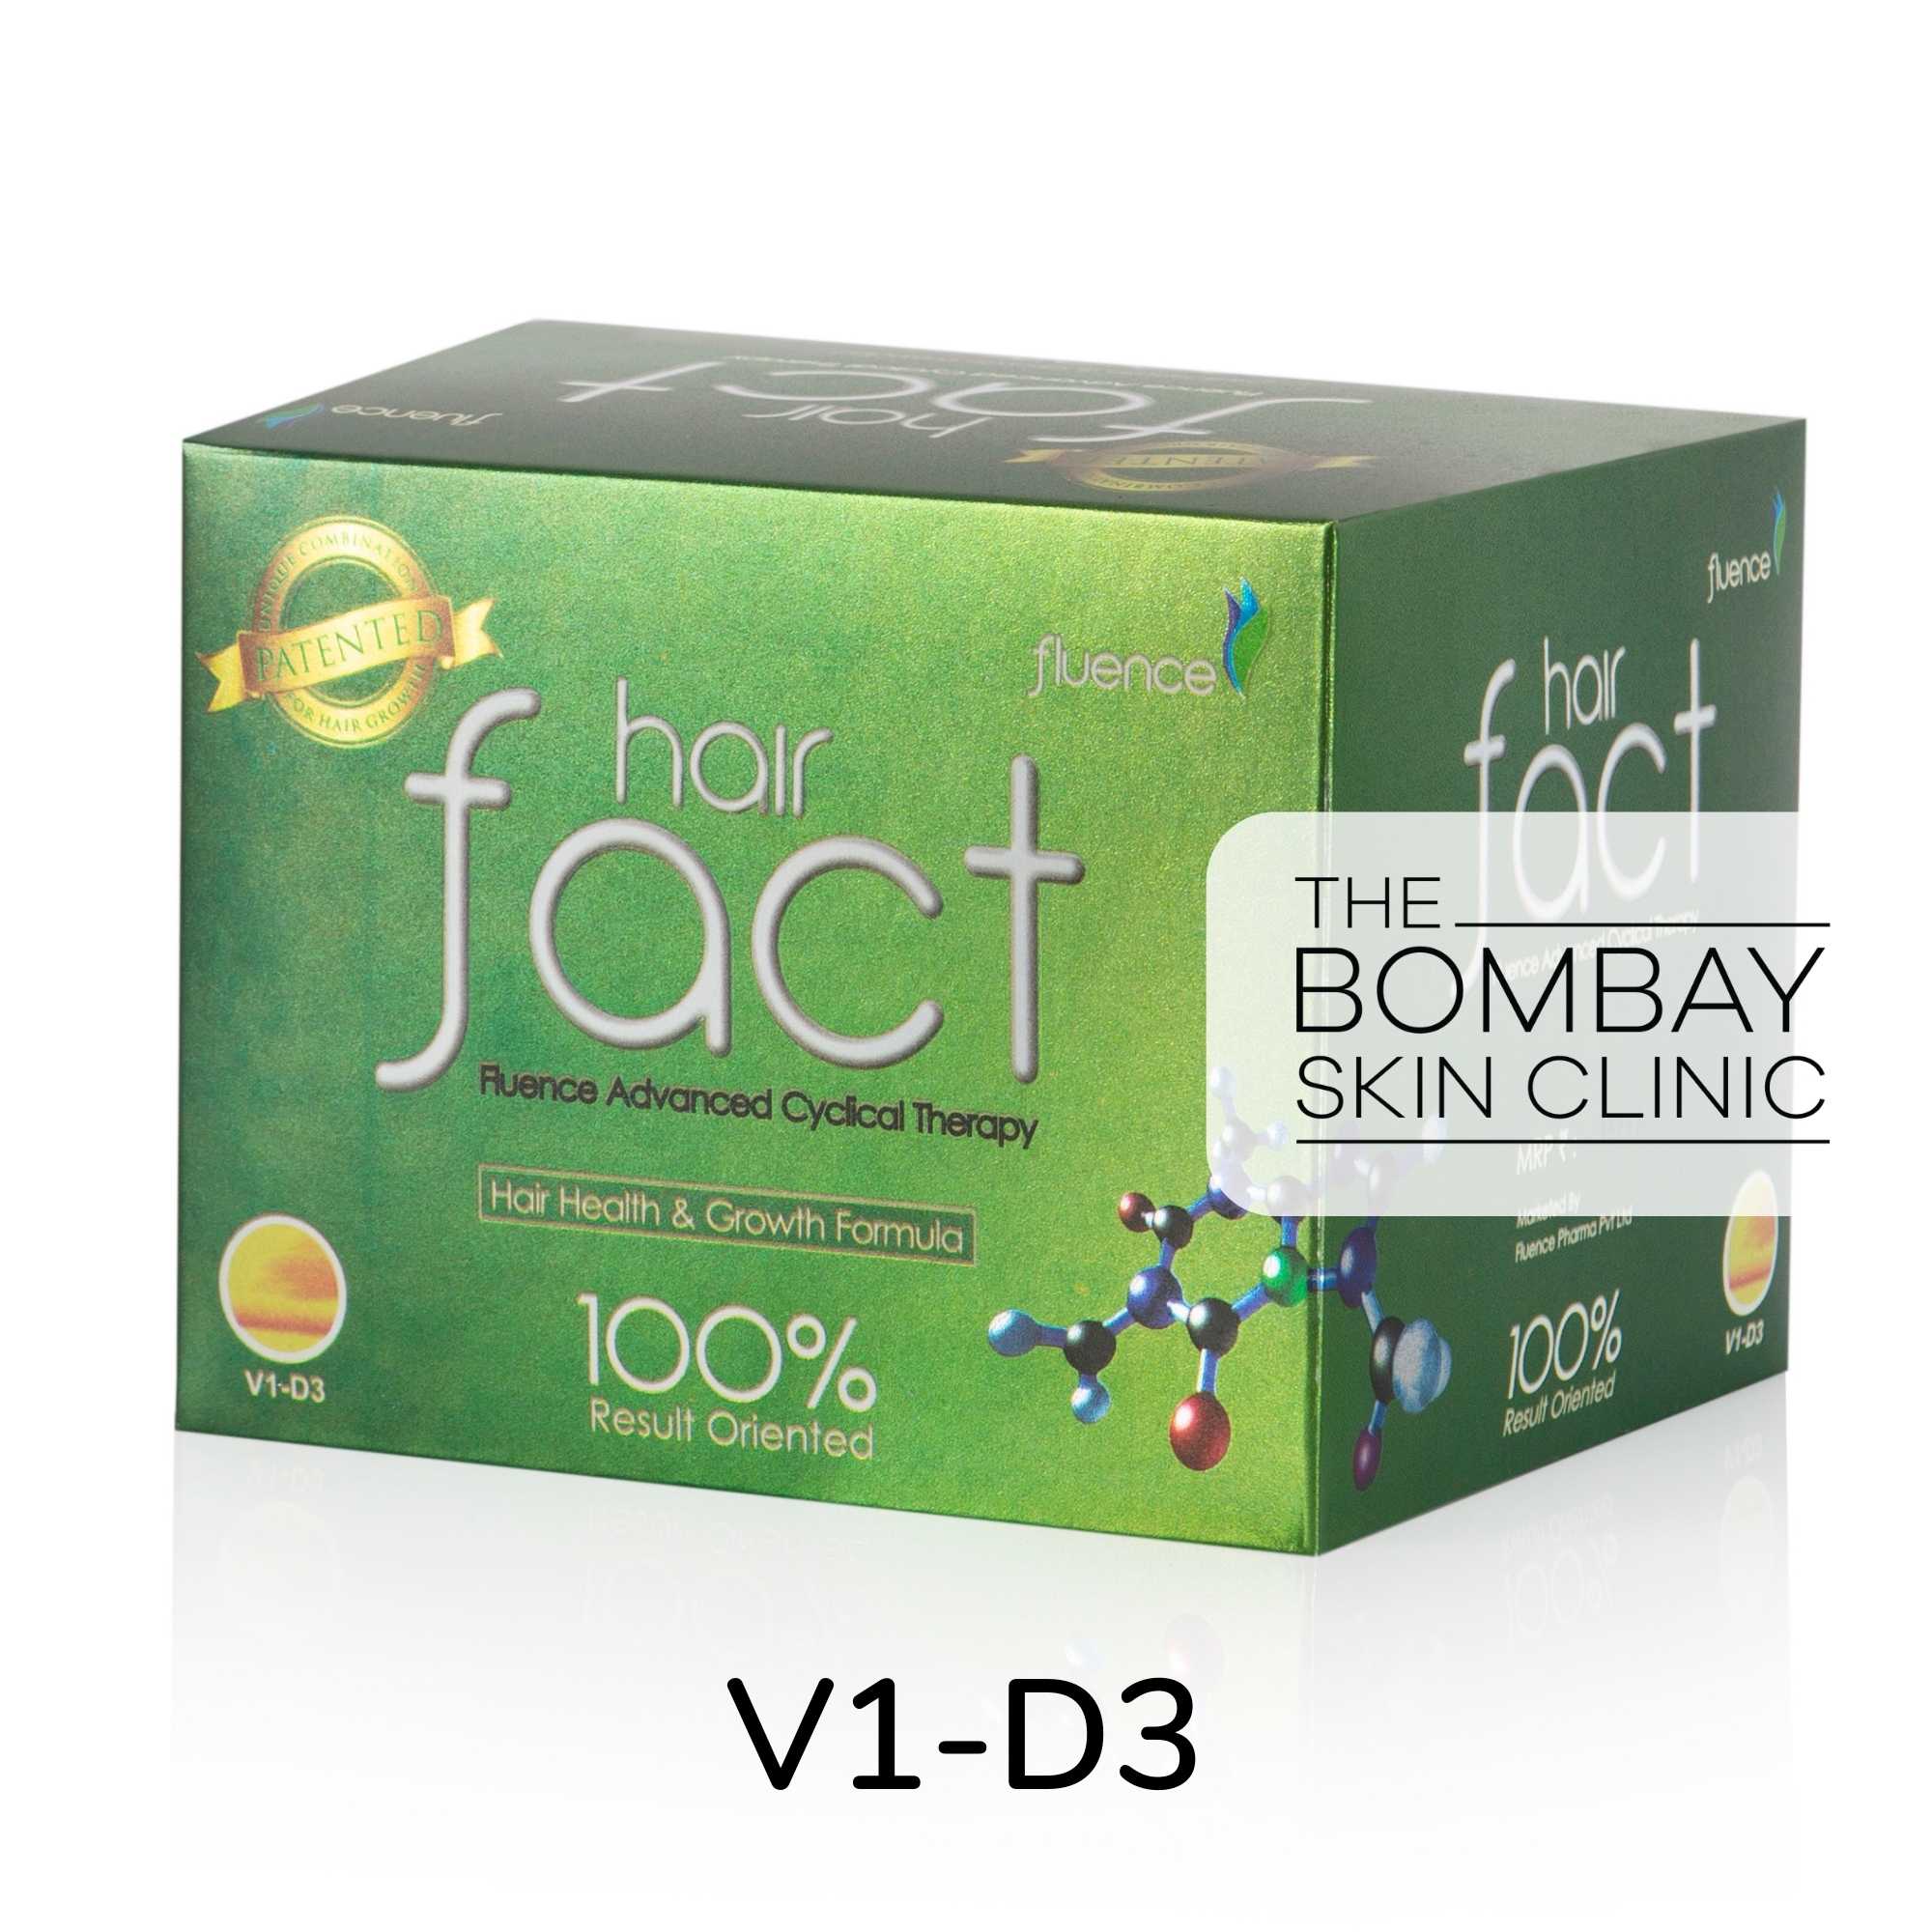 Male Hair Fact Kit India 100 result oriented Advanced Cyclical Therapy